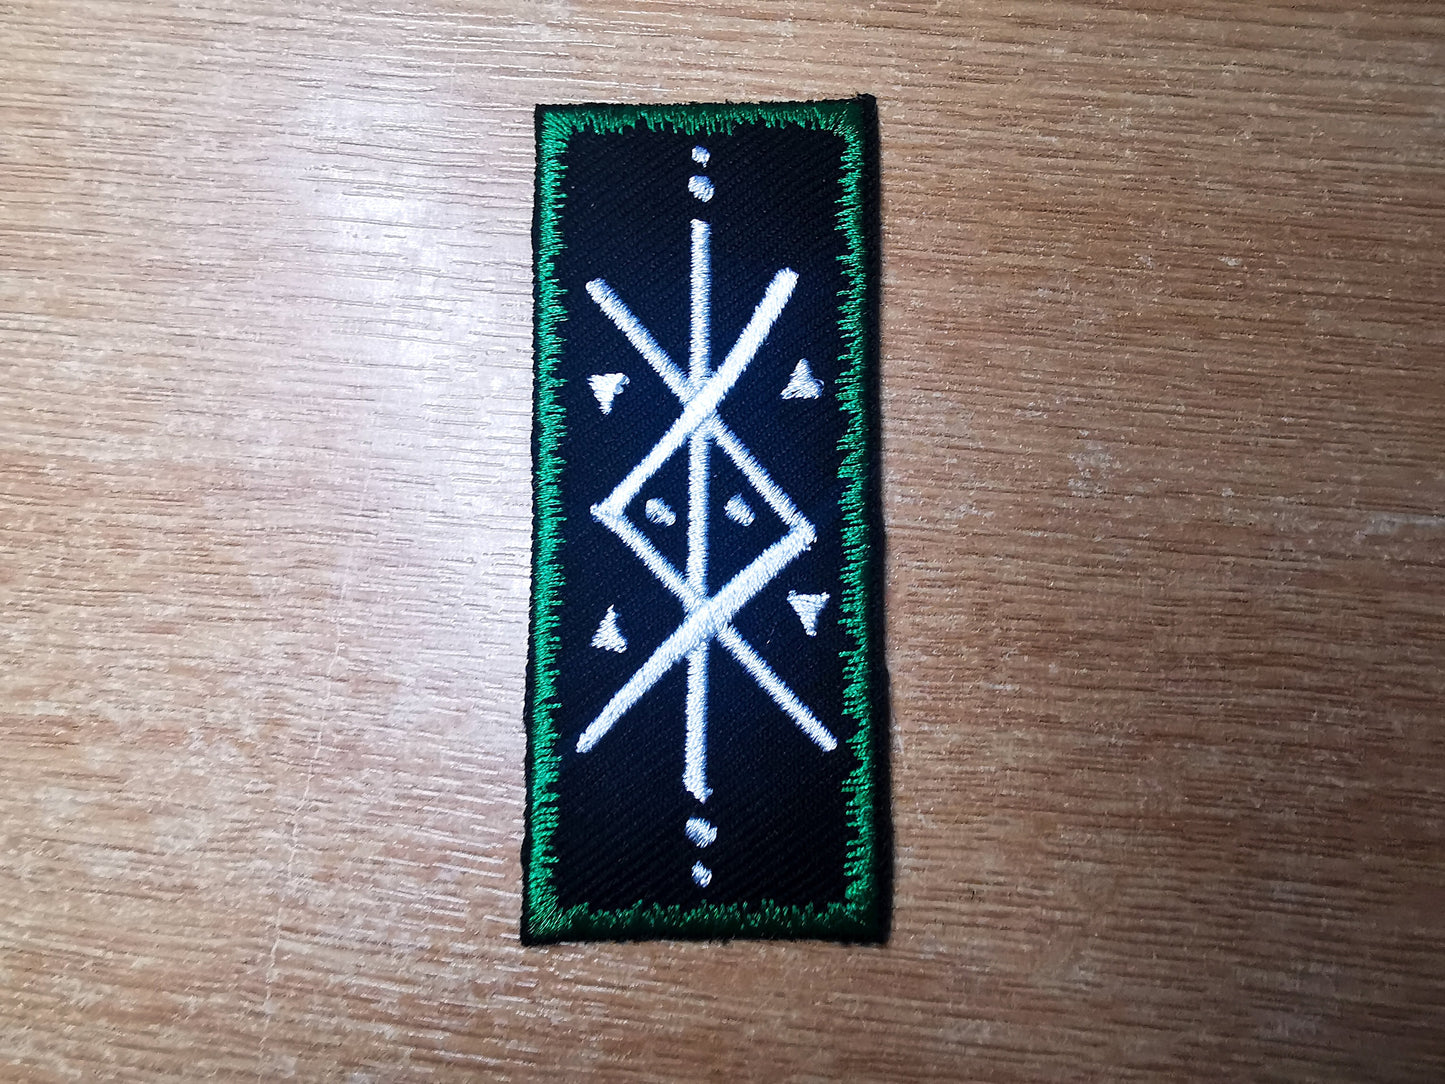 Protection Bindrune Jade Green Viking Patch Iron On Embroidered Norse Heathenry Bind Runes